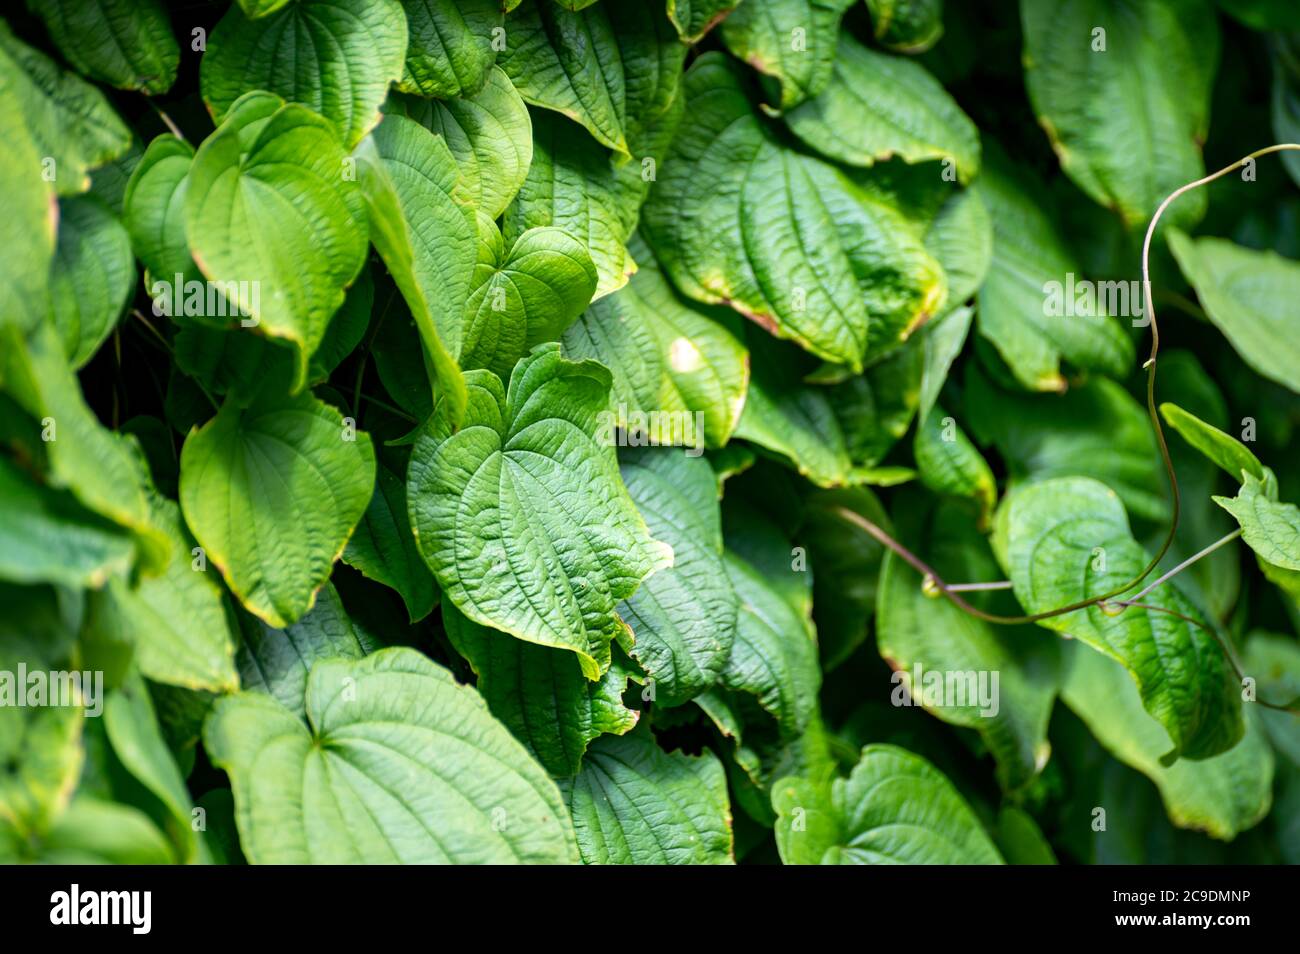 Botanical collection of climbing or medicinal plants, Dioscorea communis or Tamus communis, black bryony, lady's-seal or black bindweed plant in summe Stock Photo